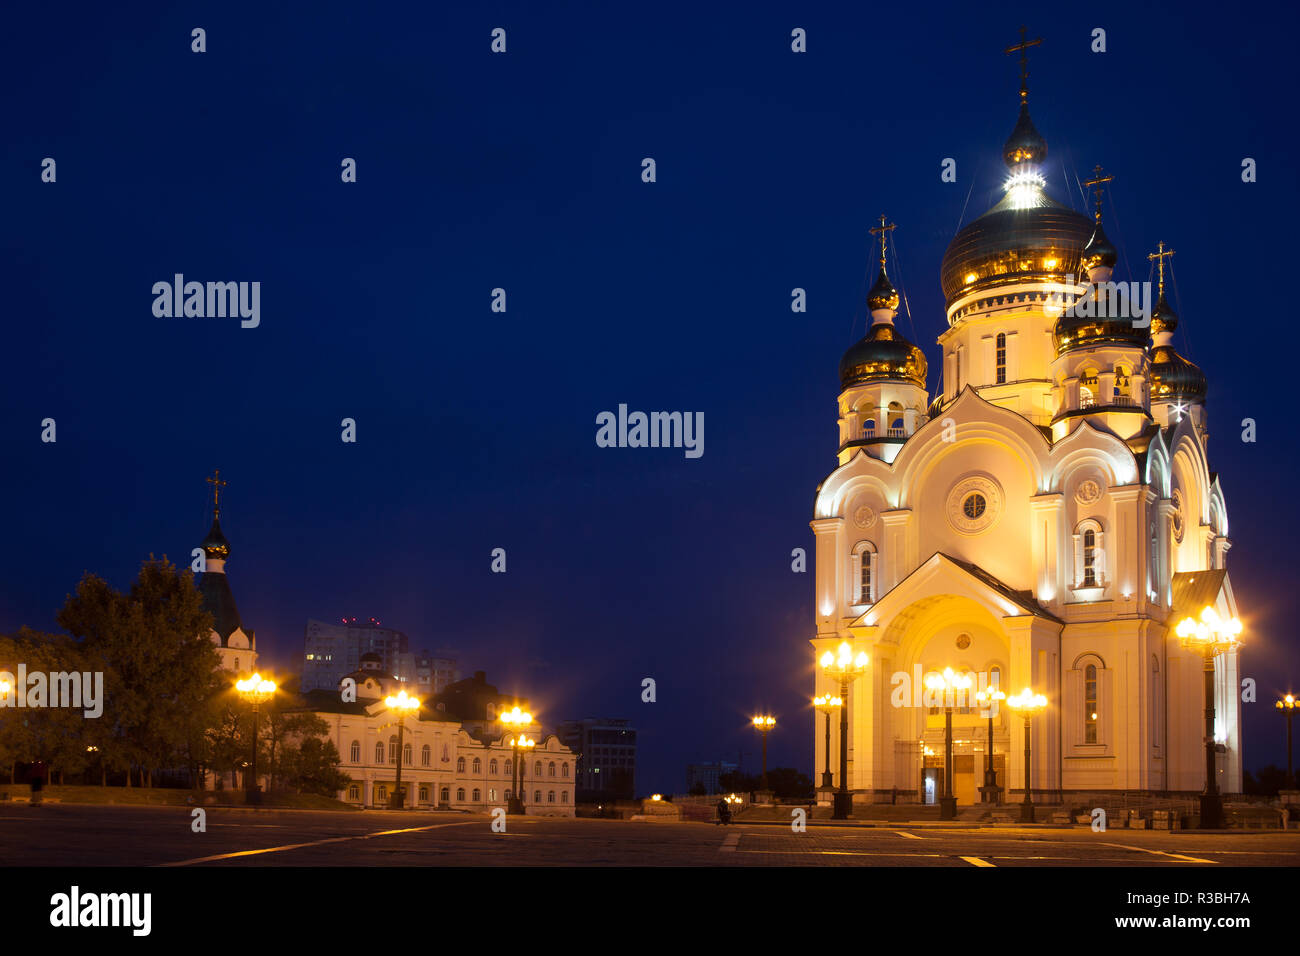 Ortodox cathedral in Khabarovsk, Russia in the night Stock Photo